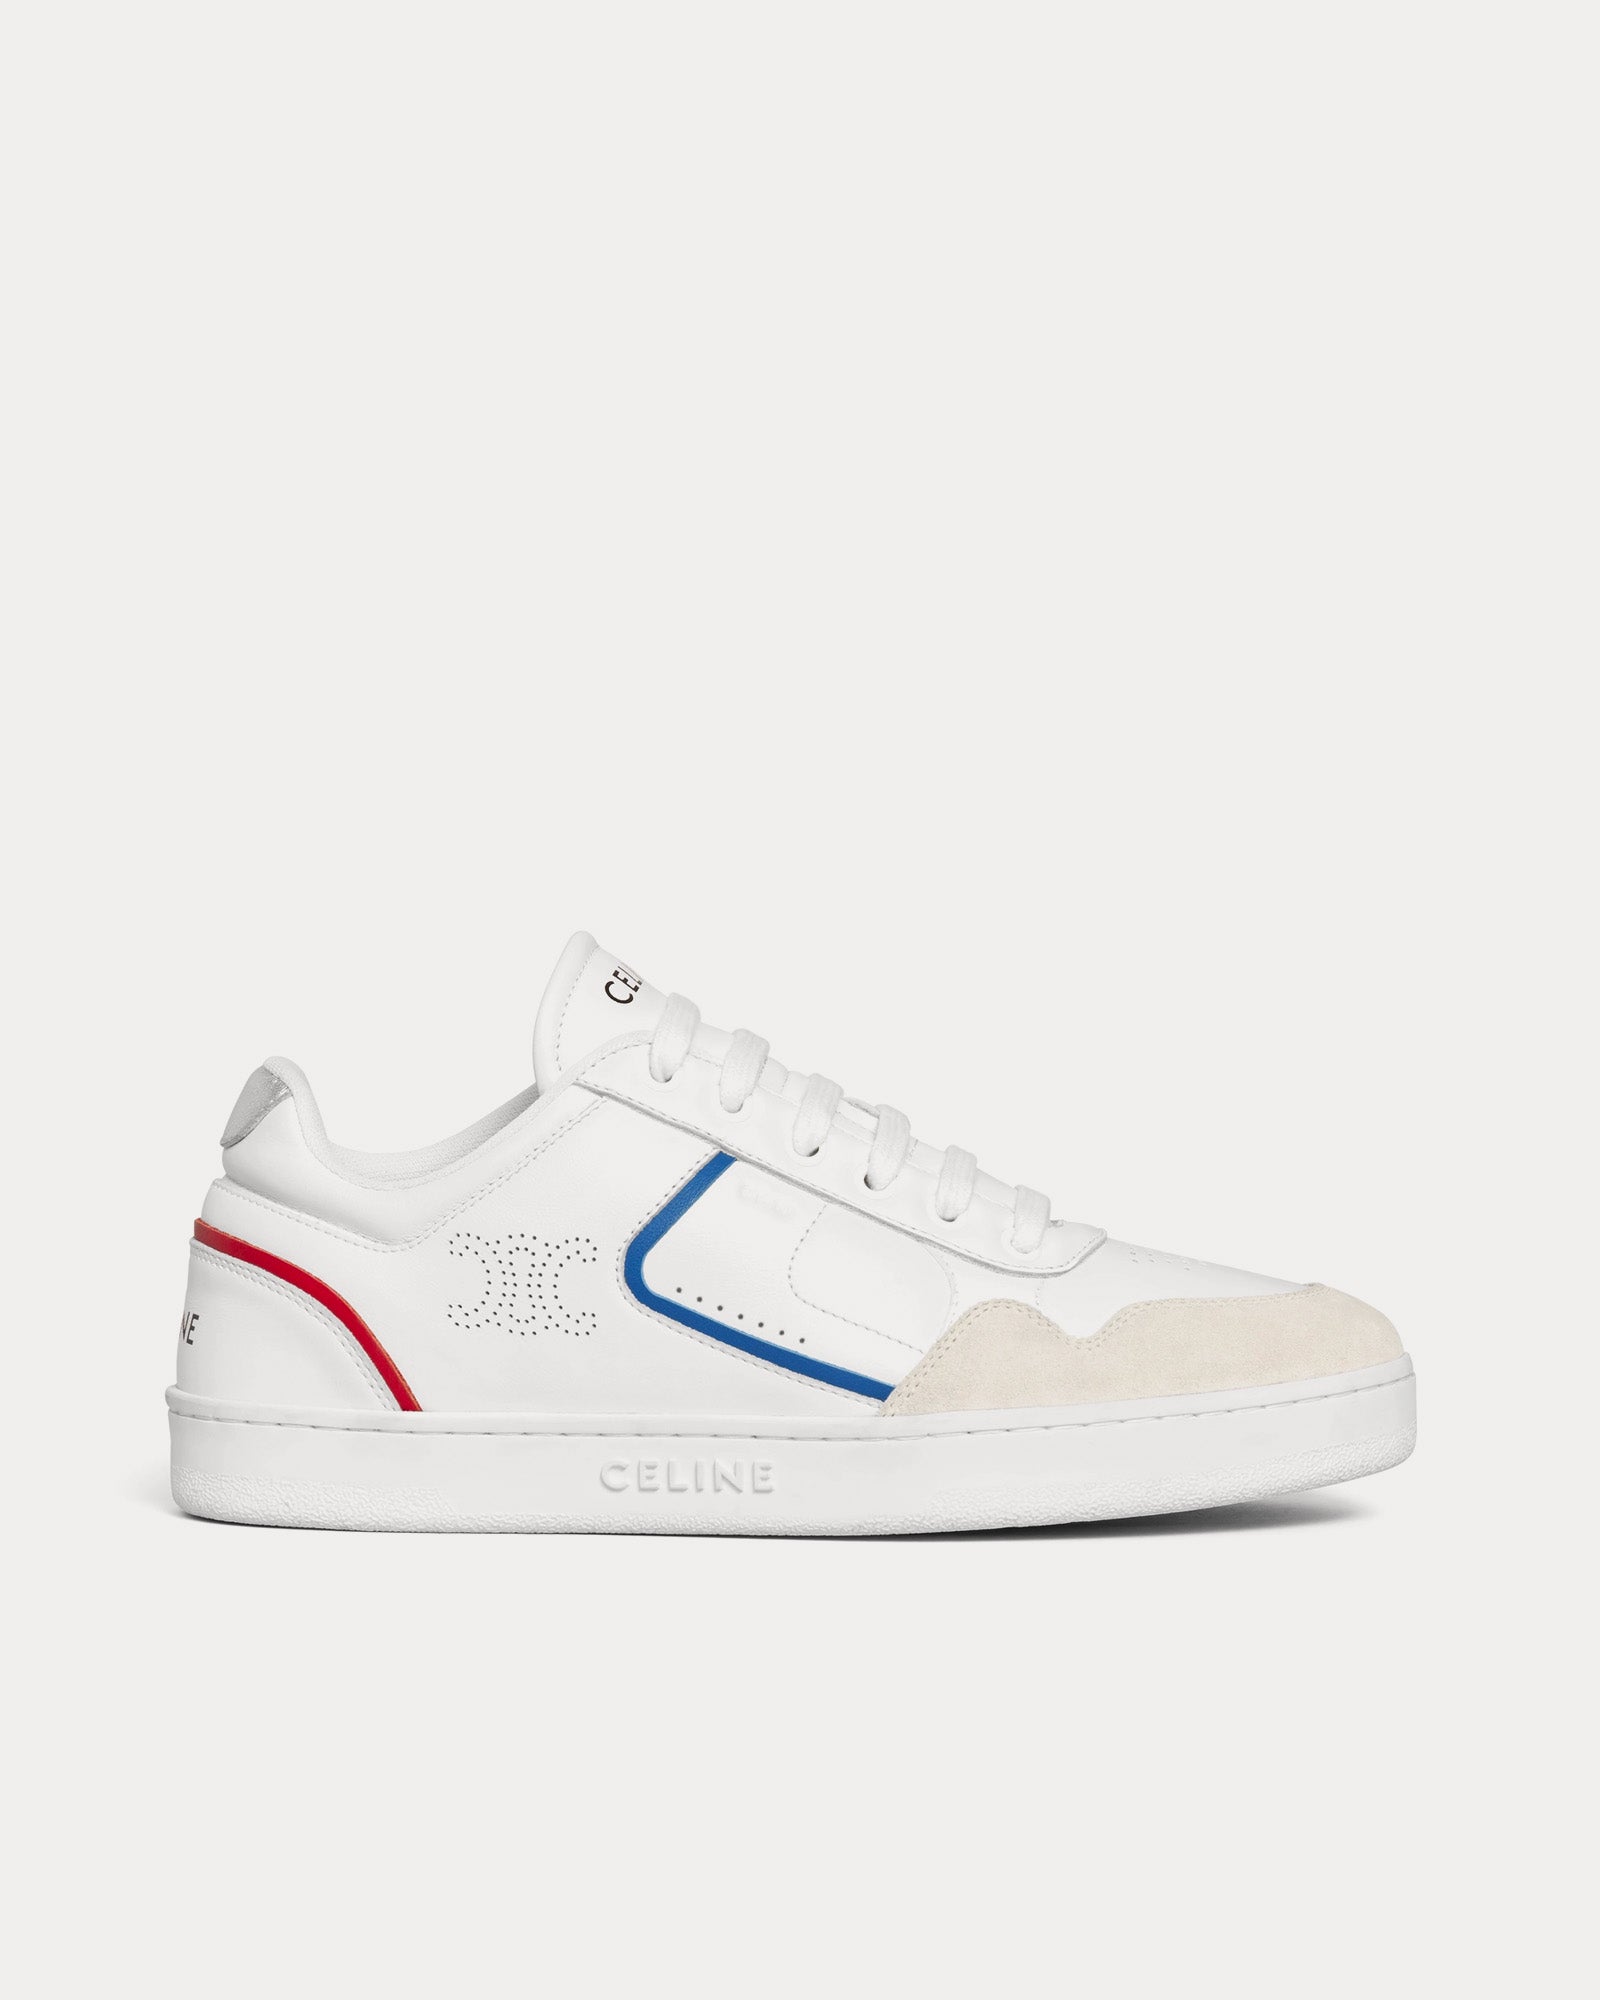 Celine - CT-10 Lace-Up Calfskin Optic White / Blue / Red / Silver Low Top Sneakers